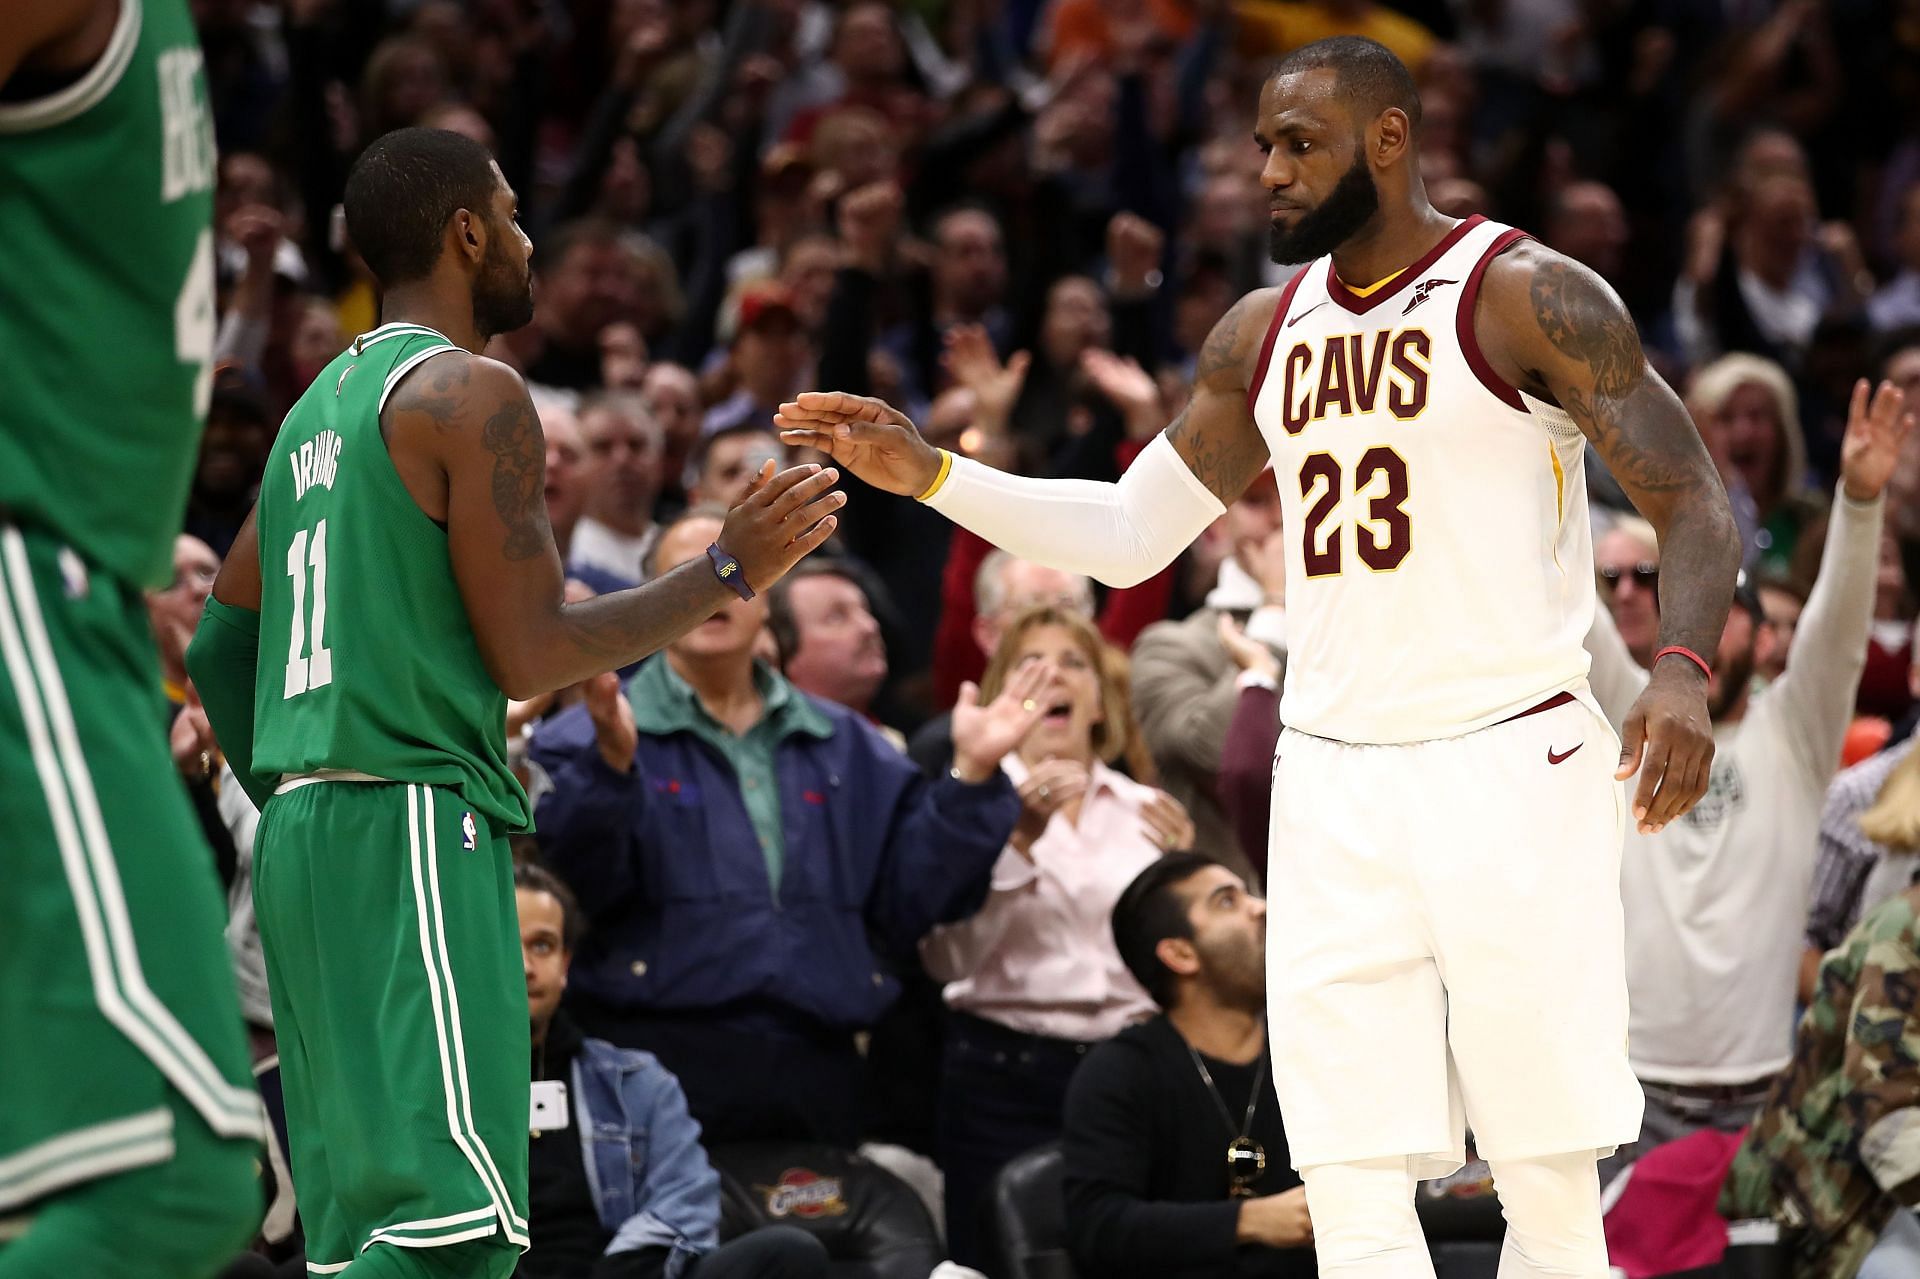 LeBron James #23 of the Cleveland Cavaliers and Kyrie Irving #11 of the Boston Celtics shake hands after a Cavaliers 102-99 victory at Quicken Loans Arena on October 17, 2017 in Cleveland, Ohio.